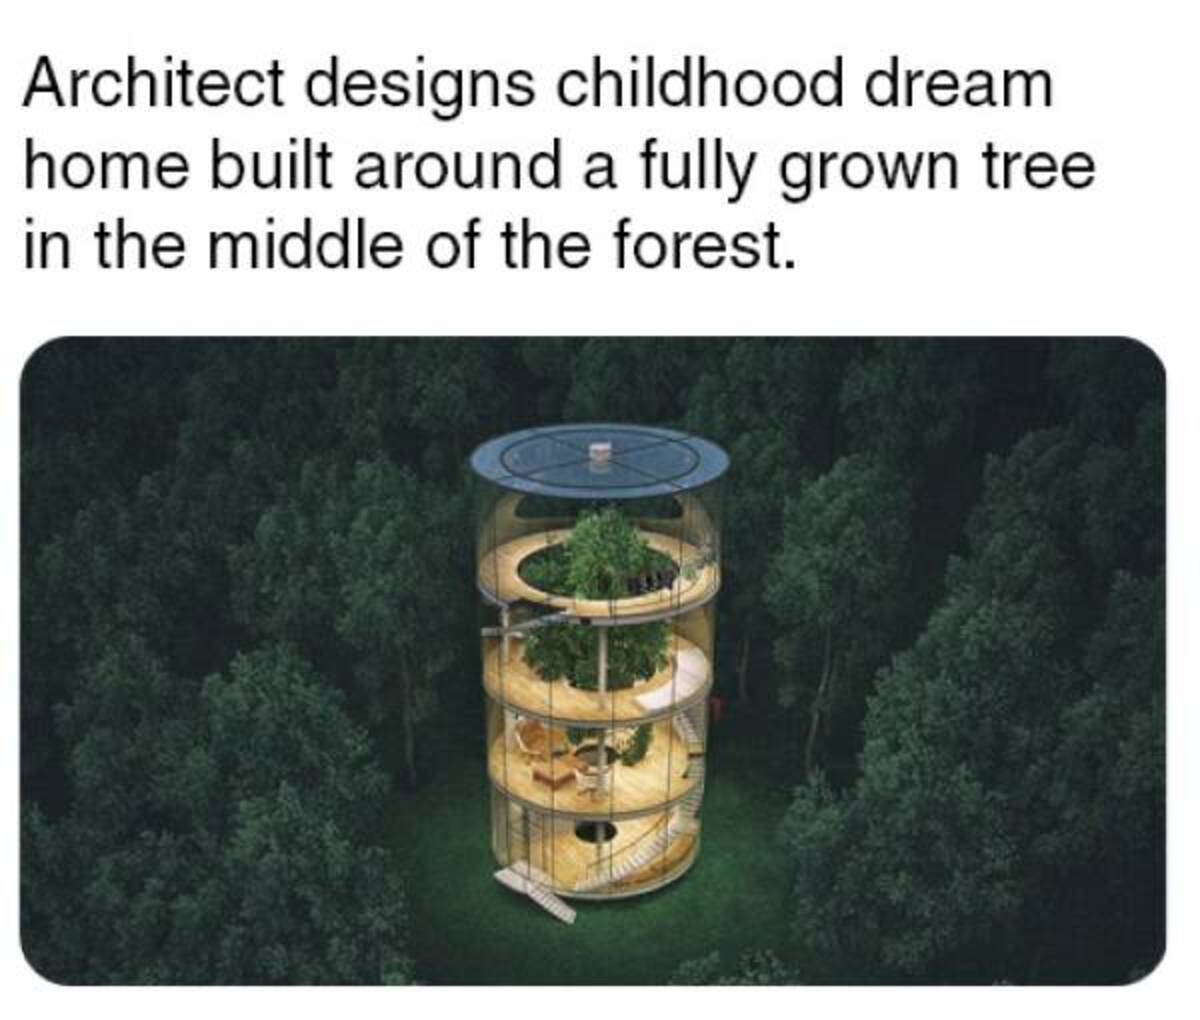 circular house - Architect designs childhood dream home built around a fully grown tree in the middle of the forest.